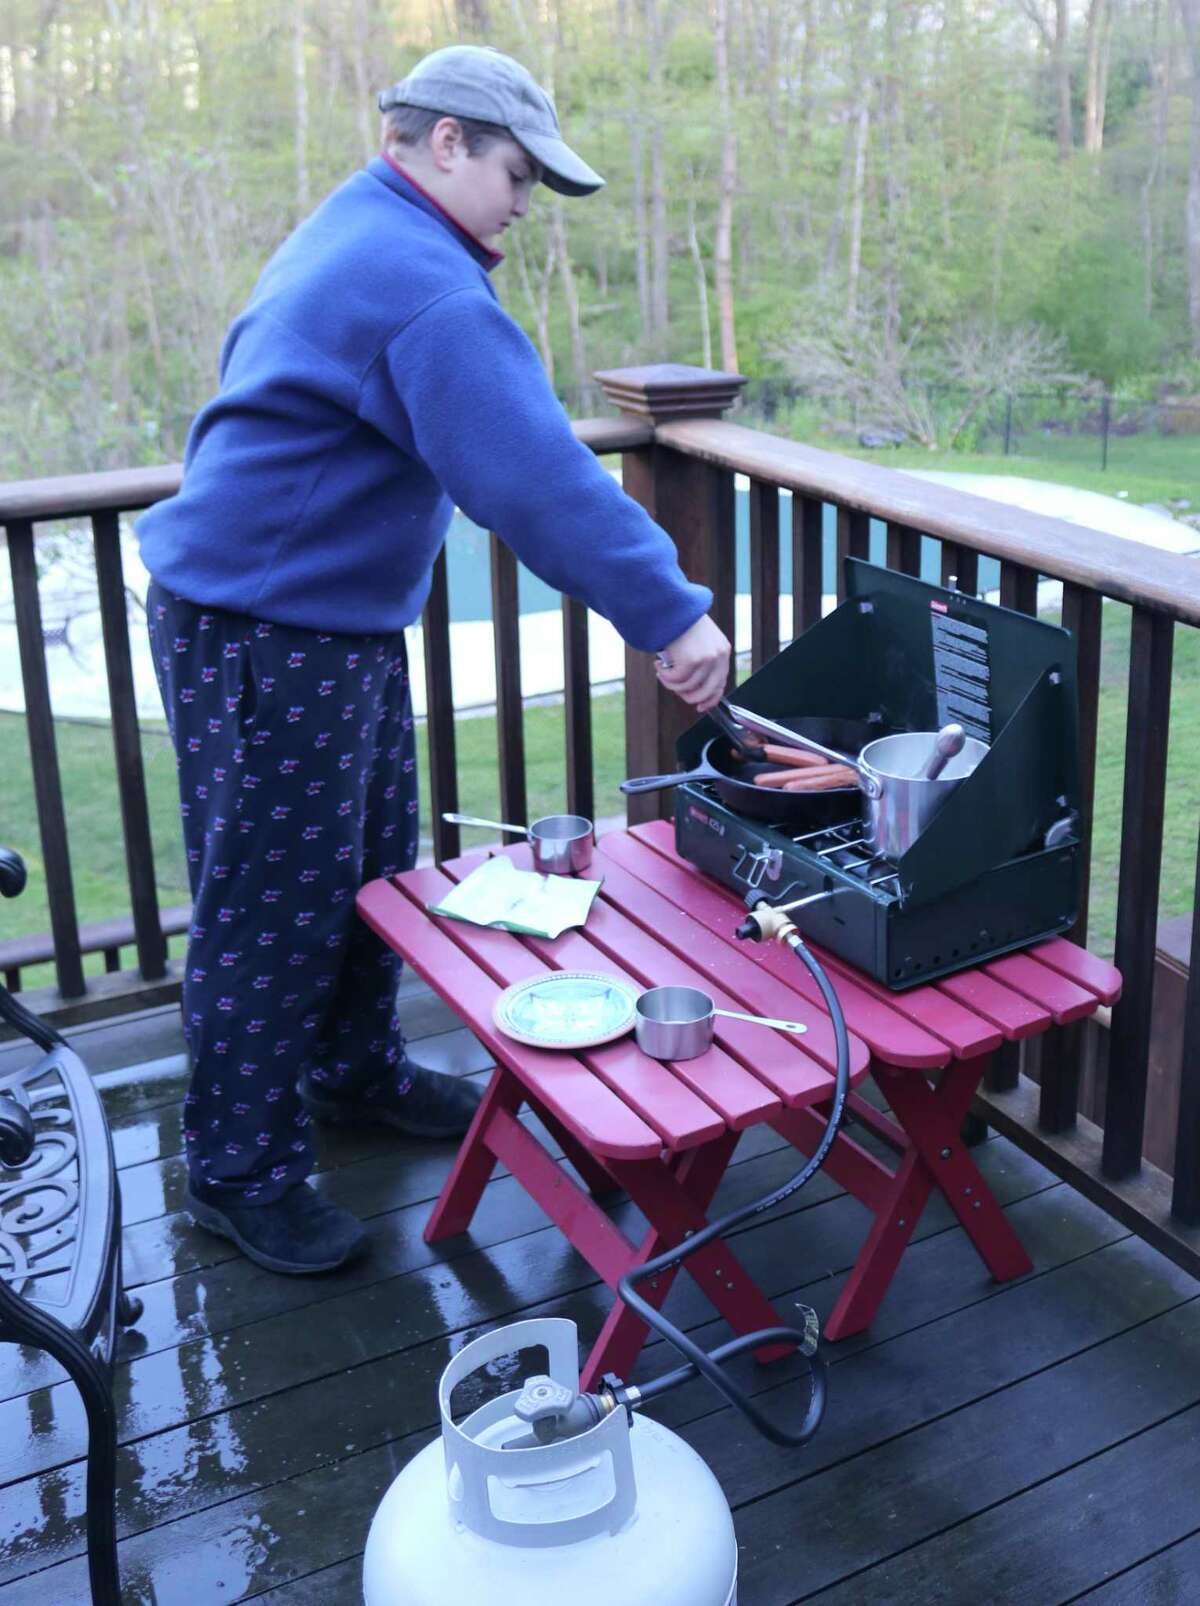 Outdoor cooking was among the skills Boy Scouts in New Canaan Boy Scout Troop 70 honed when they held a virtual campout recently amid the coronavirus pandemic. They also came together online to share their experiences.